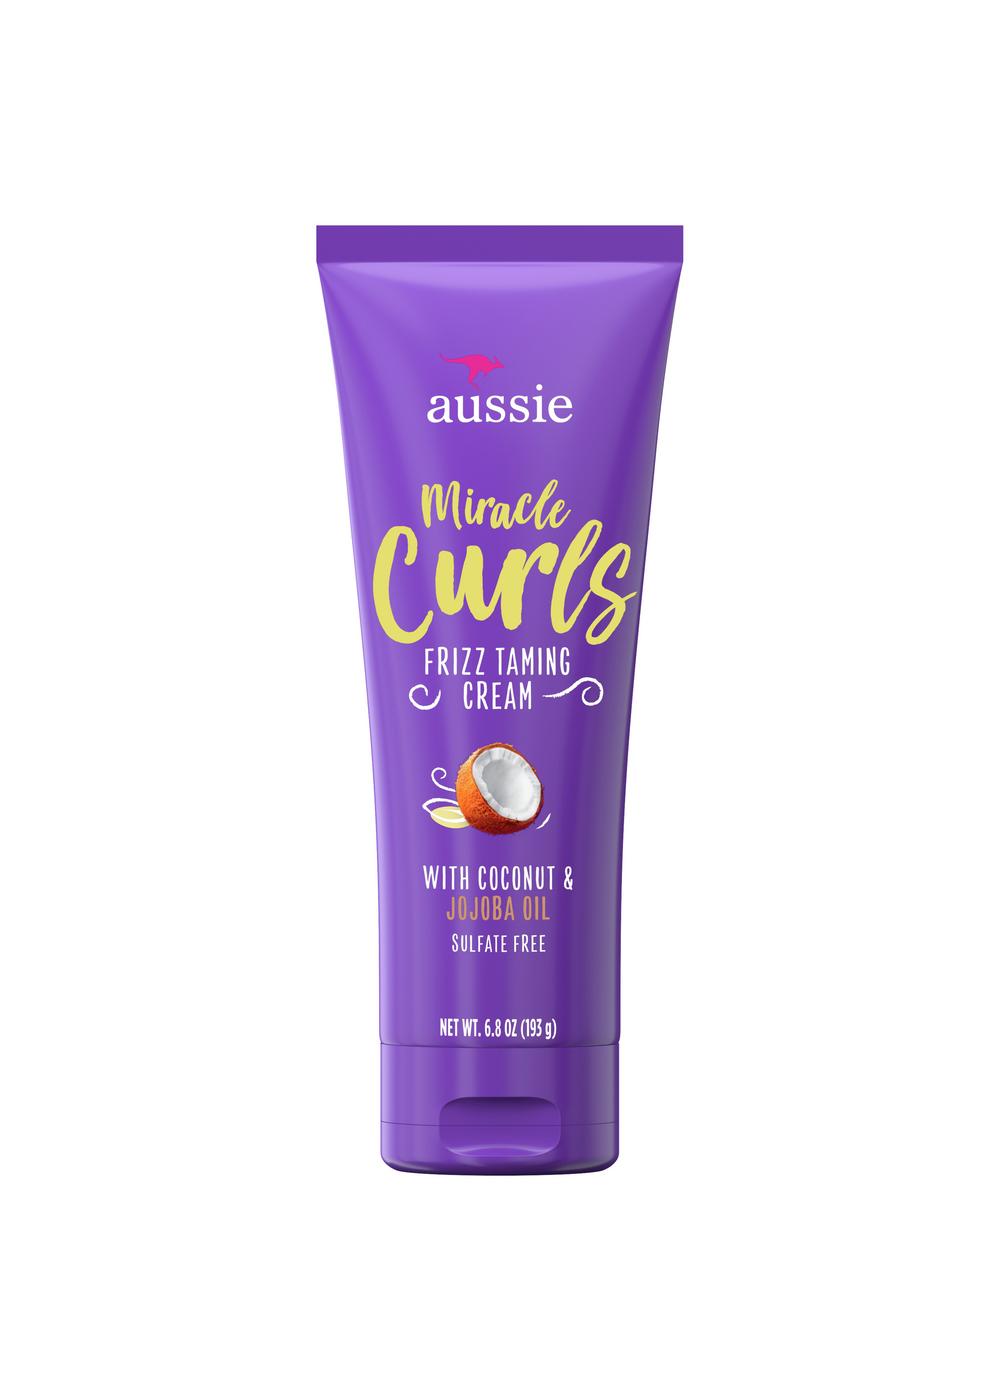 Aussie Miracle Curls Frizz Taming Cream; image 1 of 11